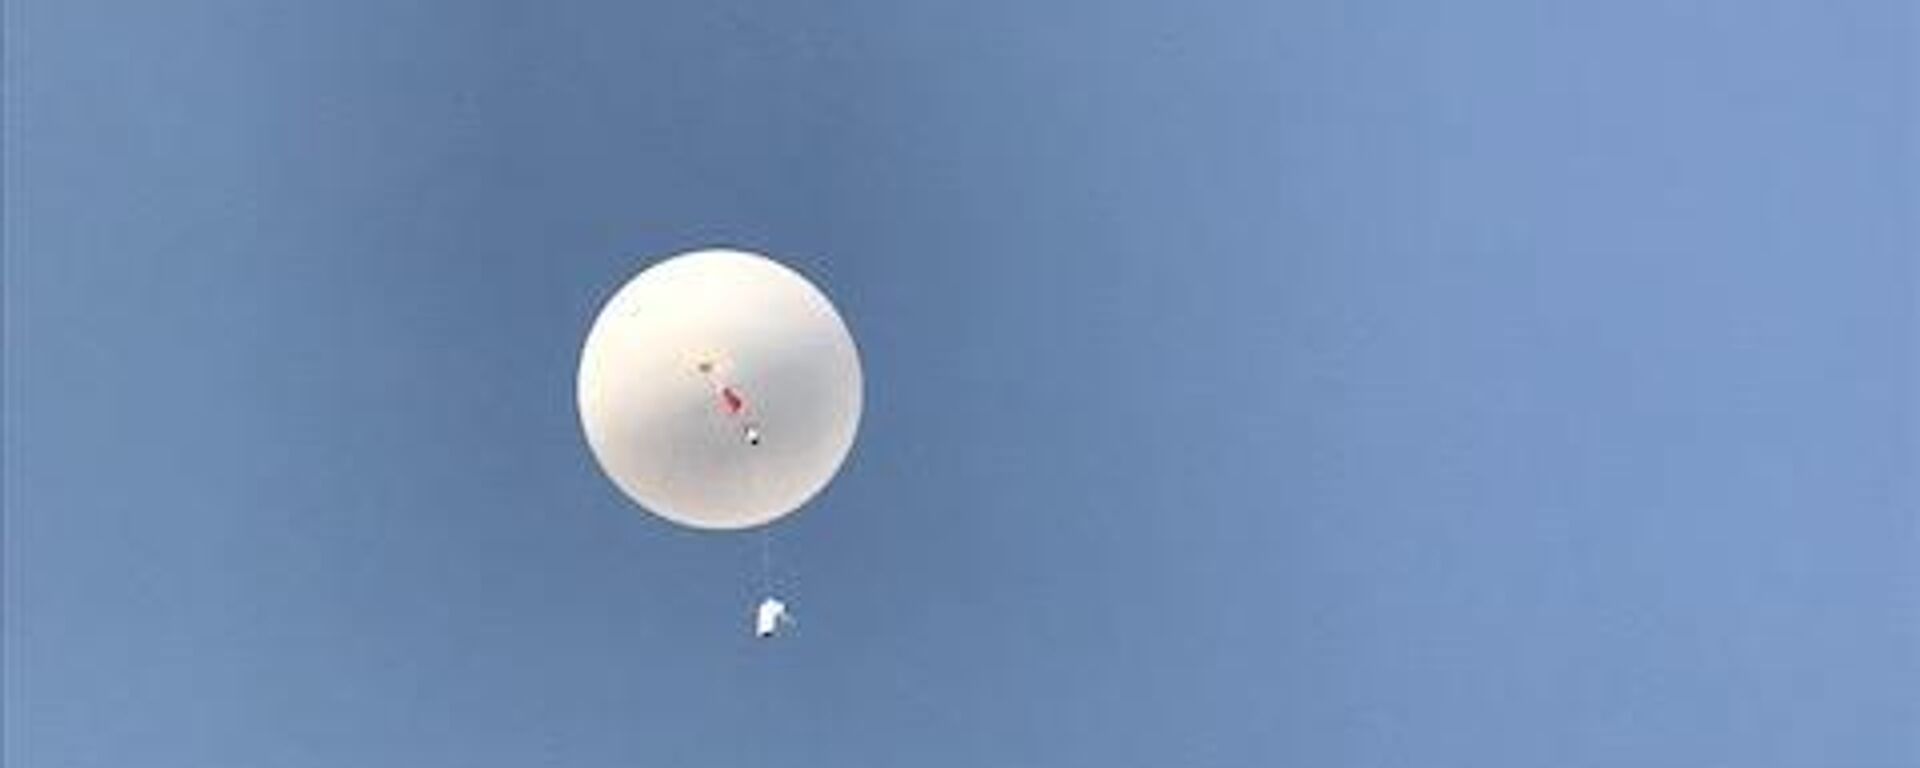 A US weather balloon launched to gather weather data close to the Meyers Fire area in Montana in September 2017 - Sputnik International, 1920, 14.02.2023